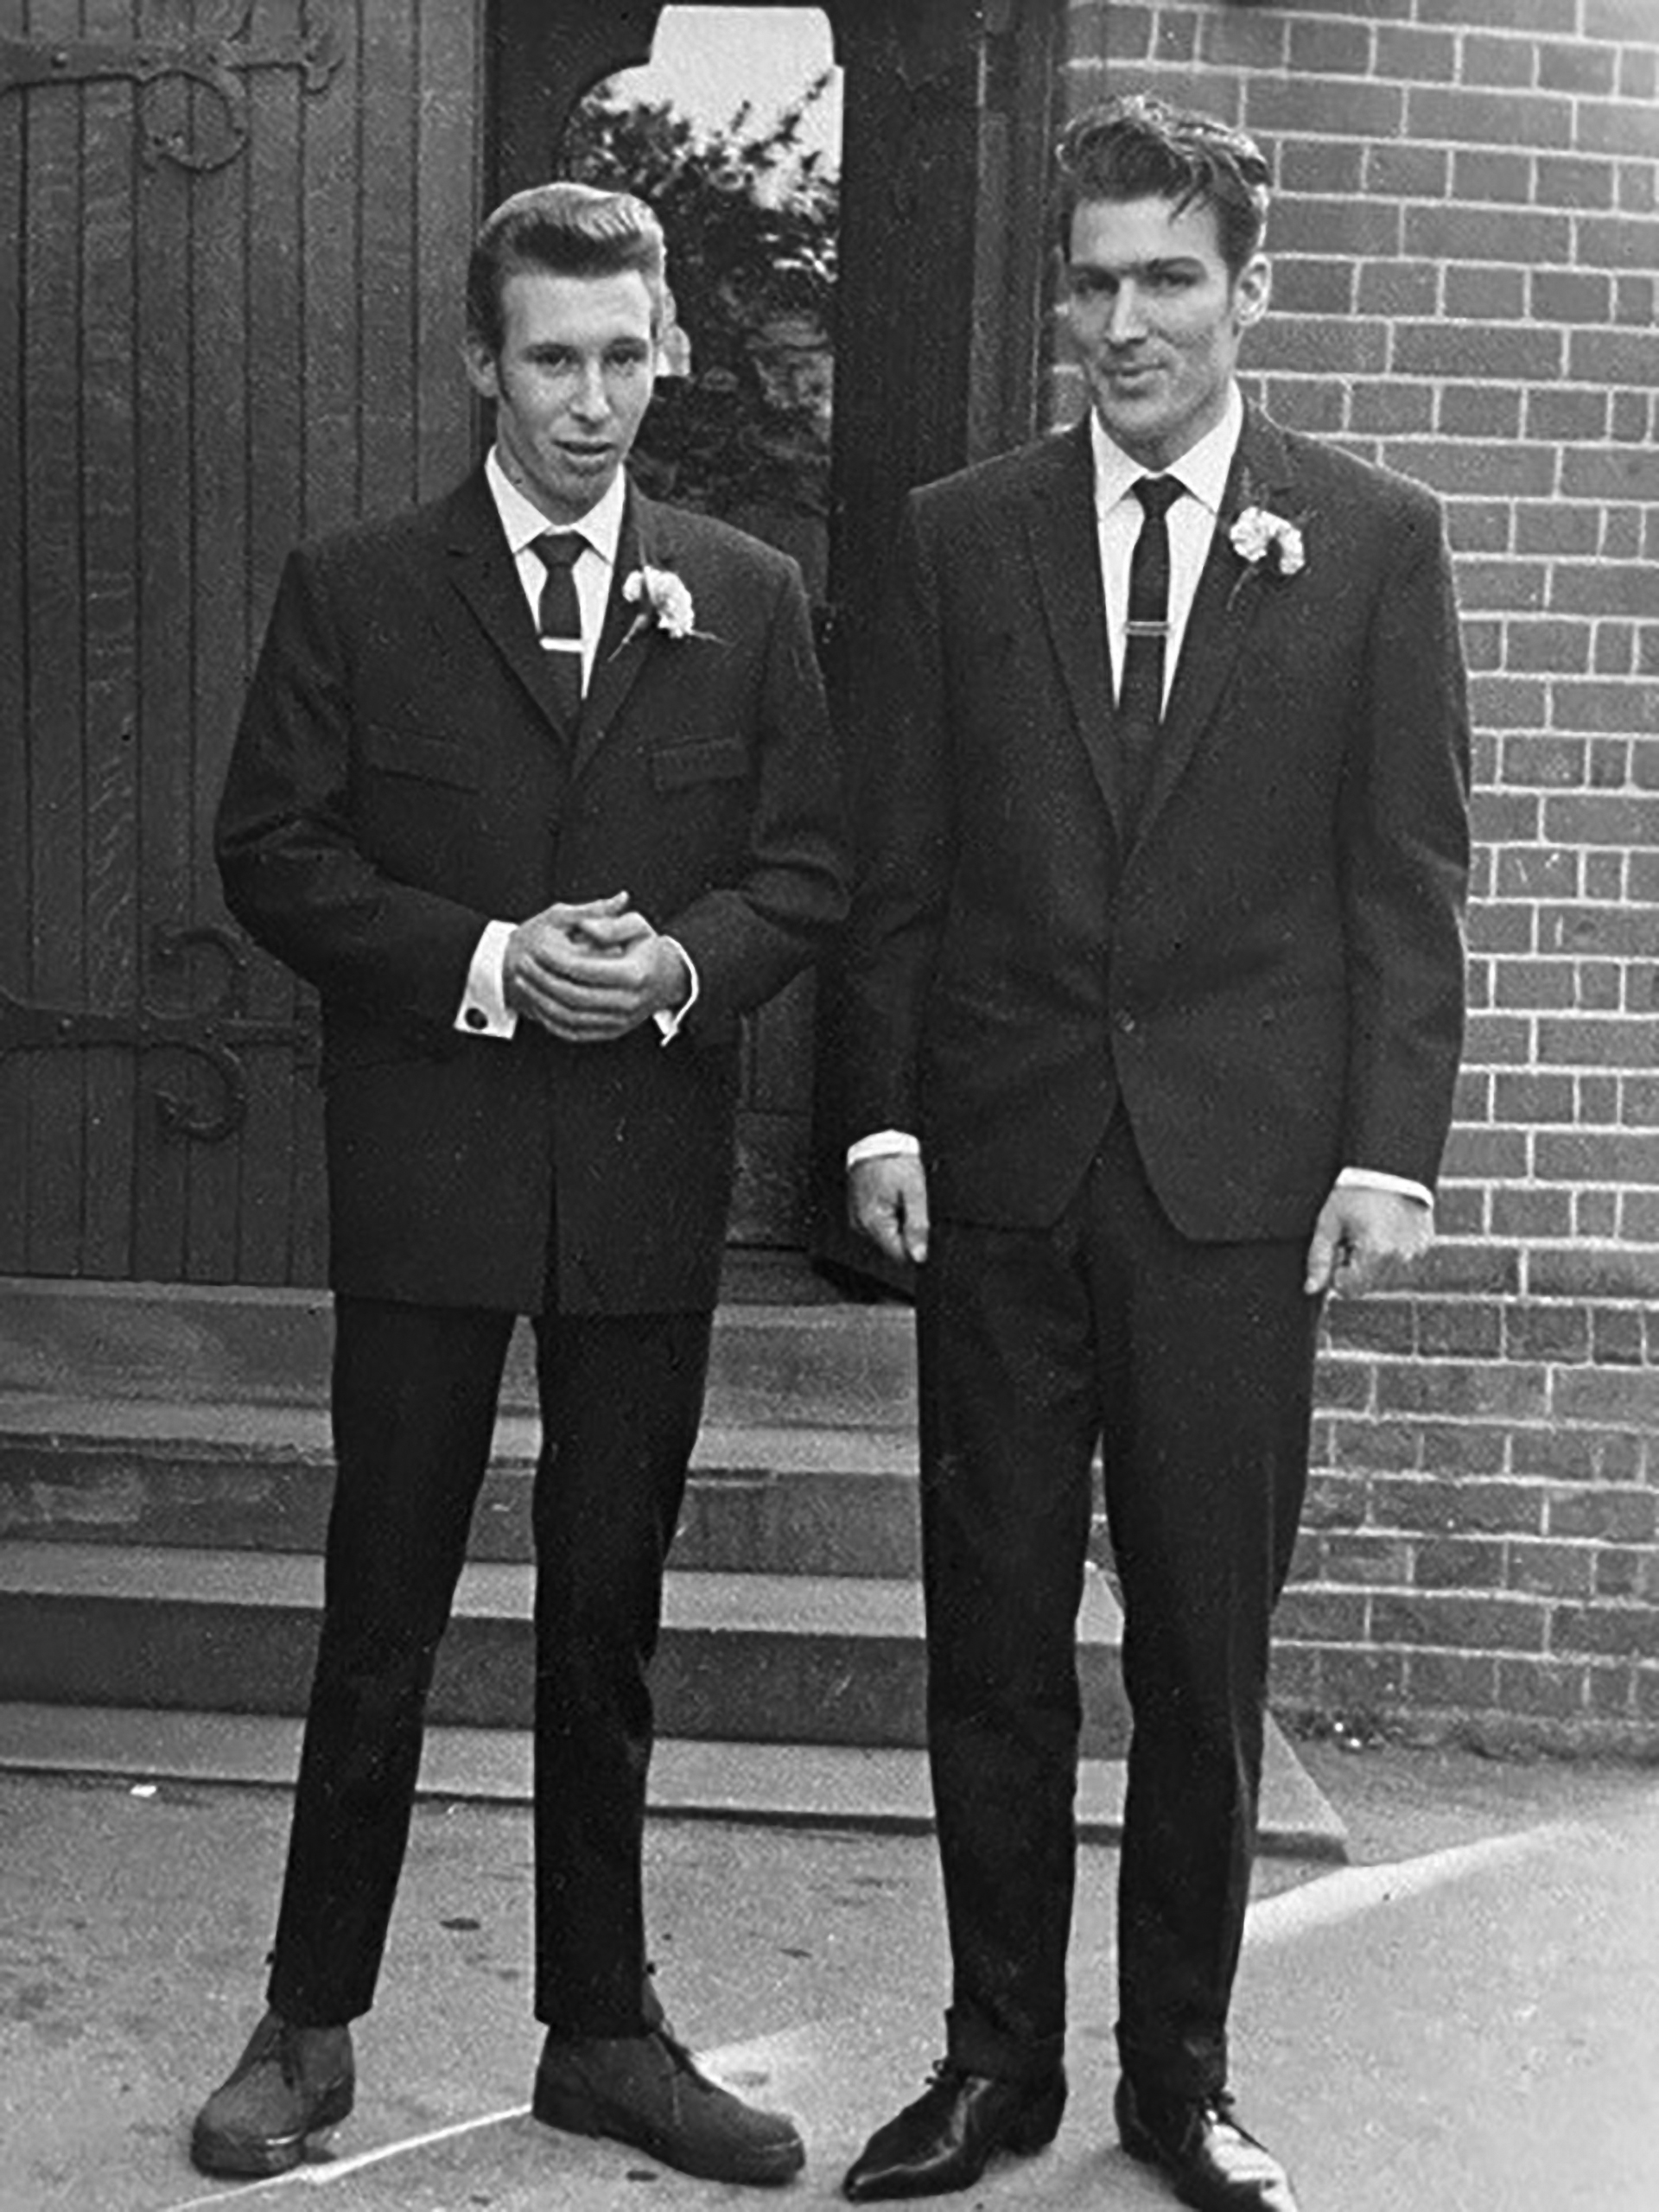 Ronnie with his brother on his wedding day in 1964